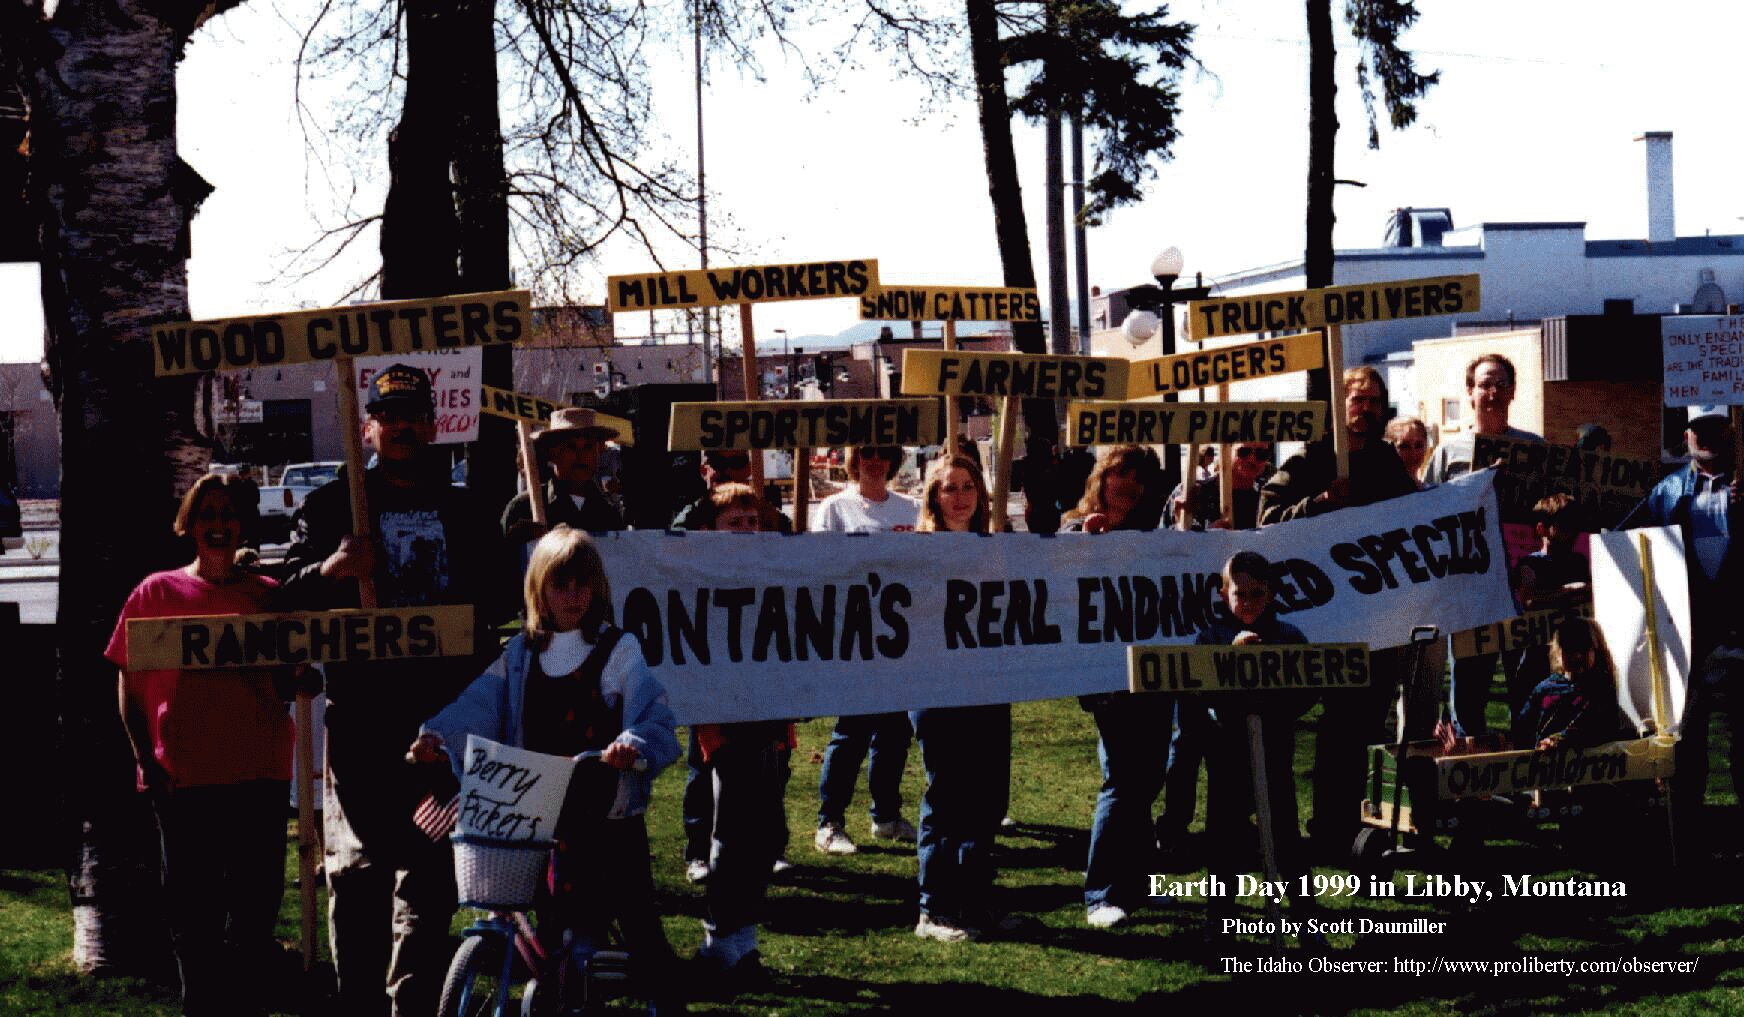 Earth Day 1999 in Libby, Montana